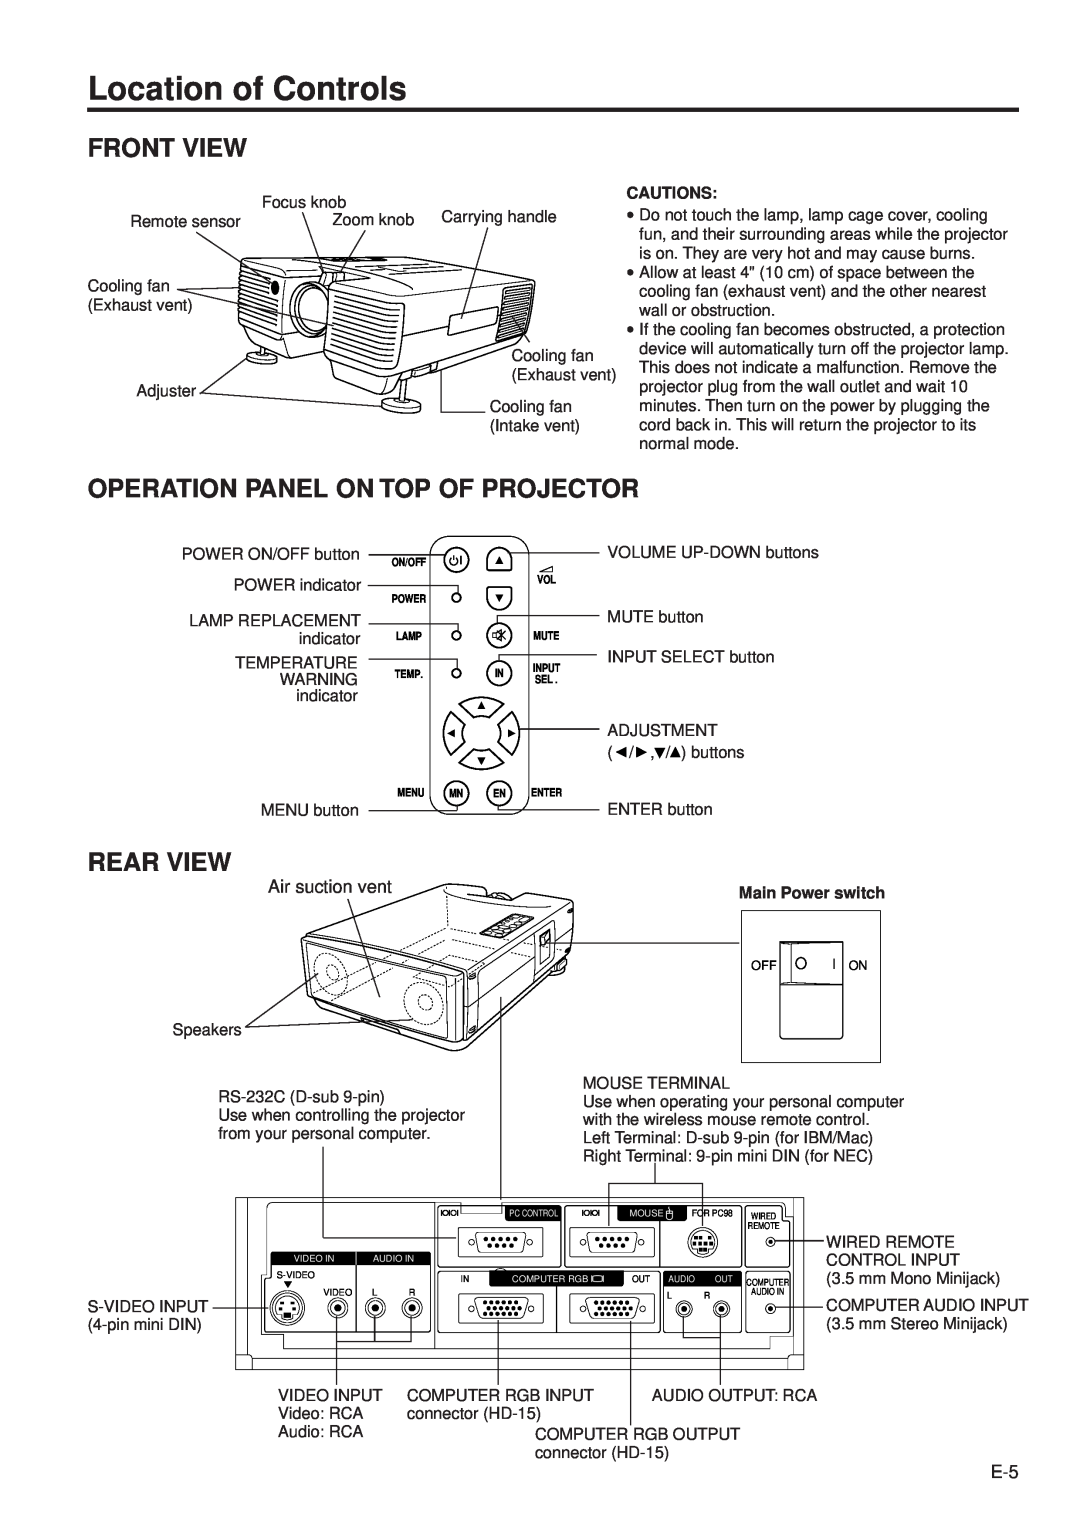 Sharp PG-D100U operation manual Location of Controls, Front View, Operation Panel On Top Of Projector, Rear View, Cautions 